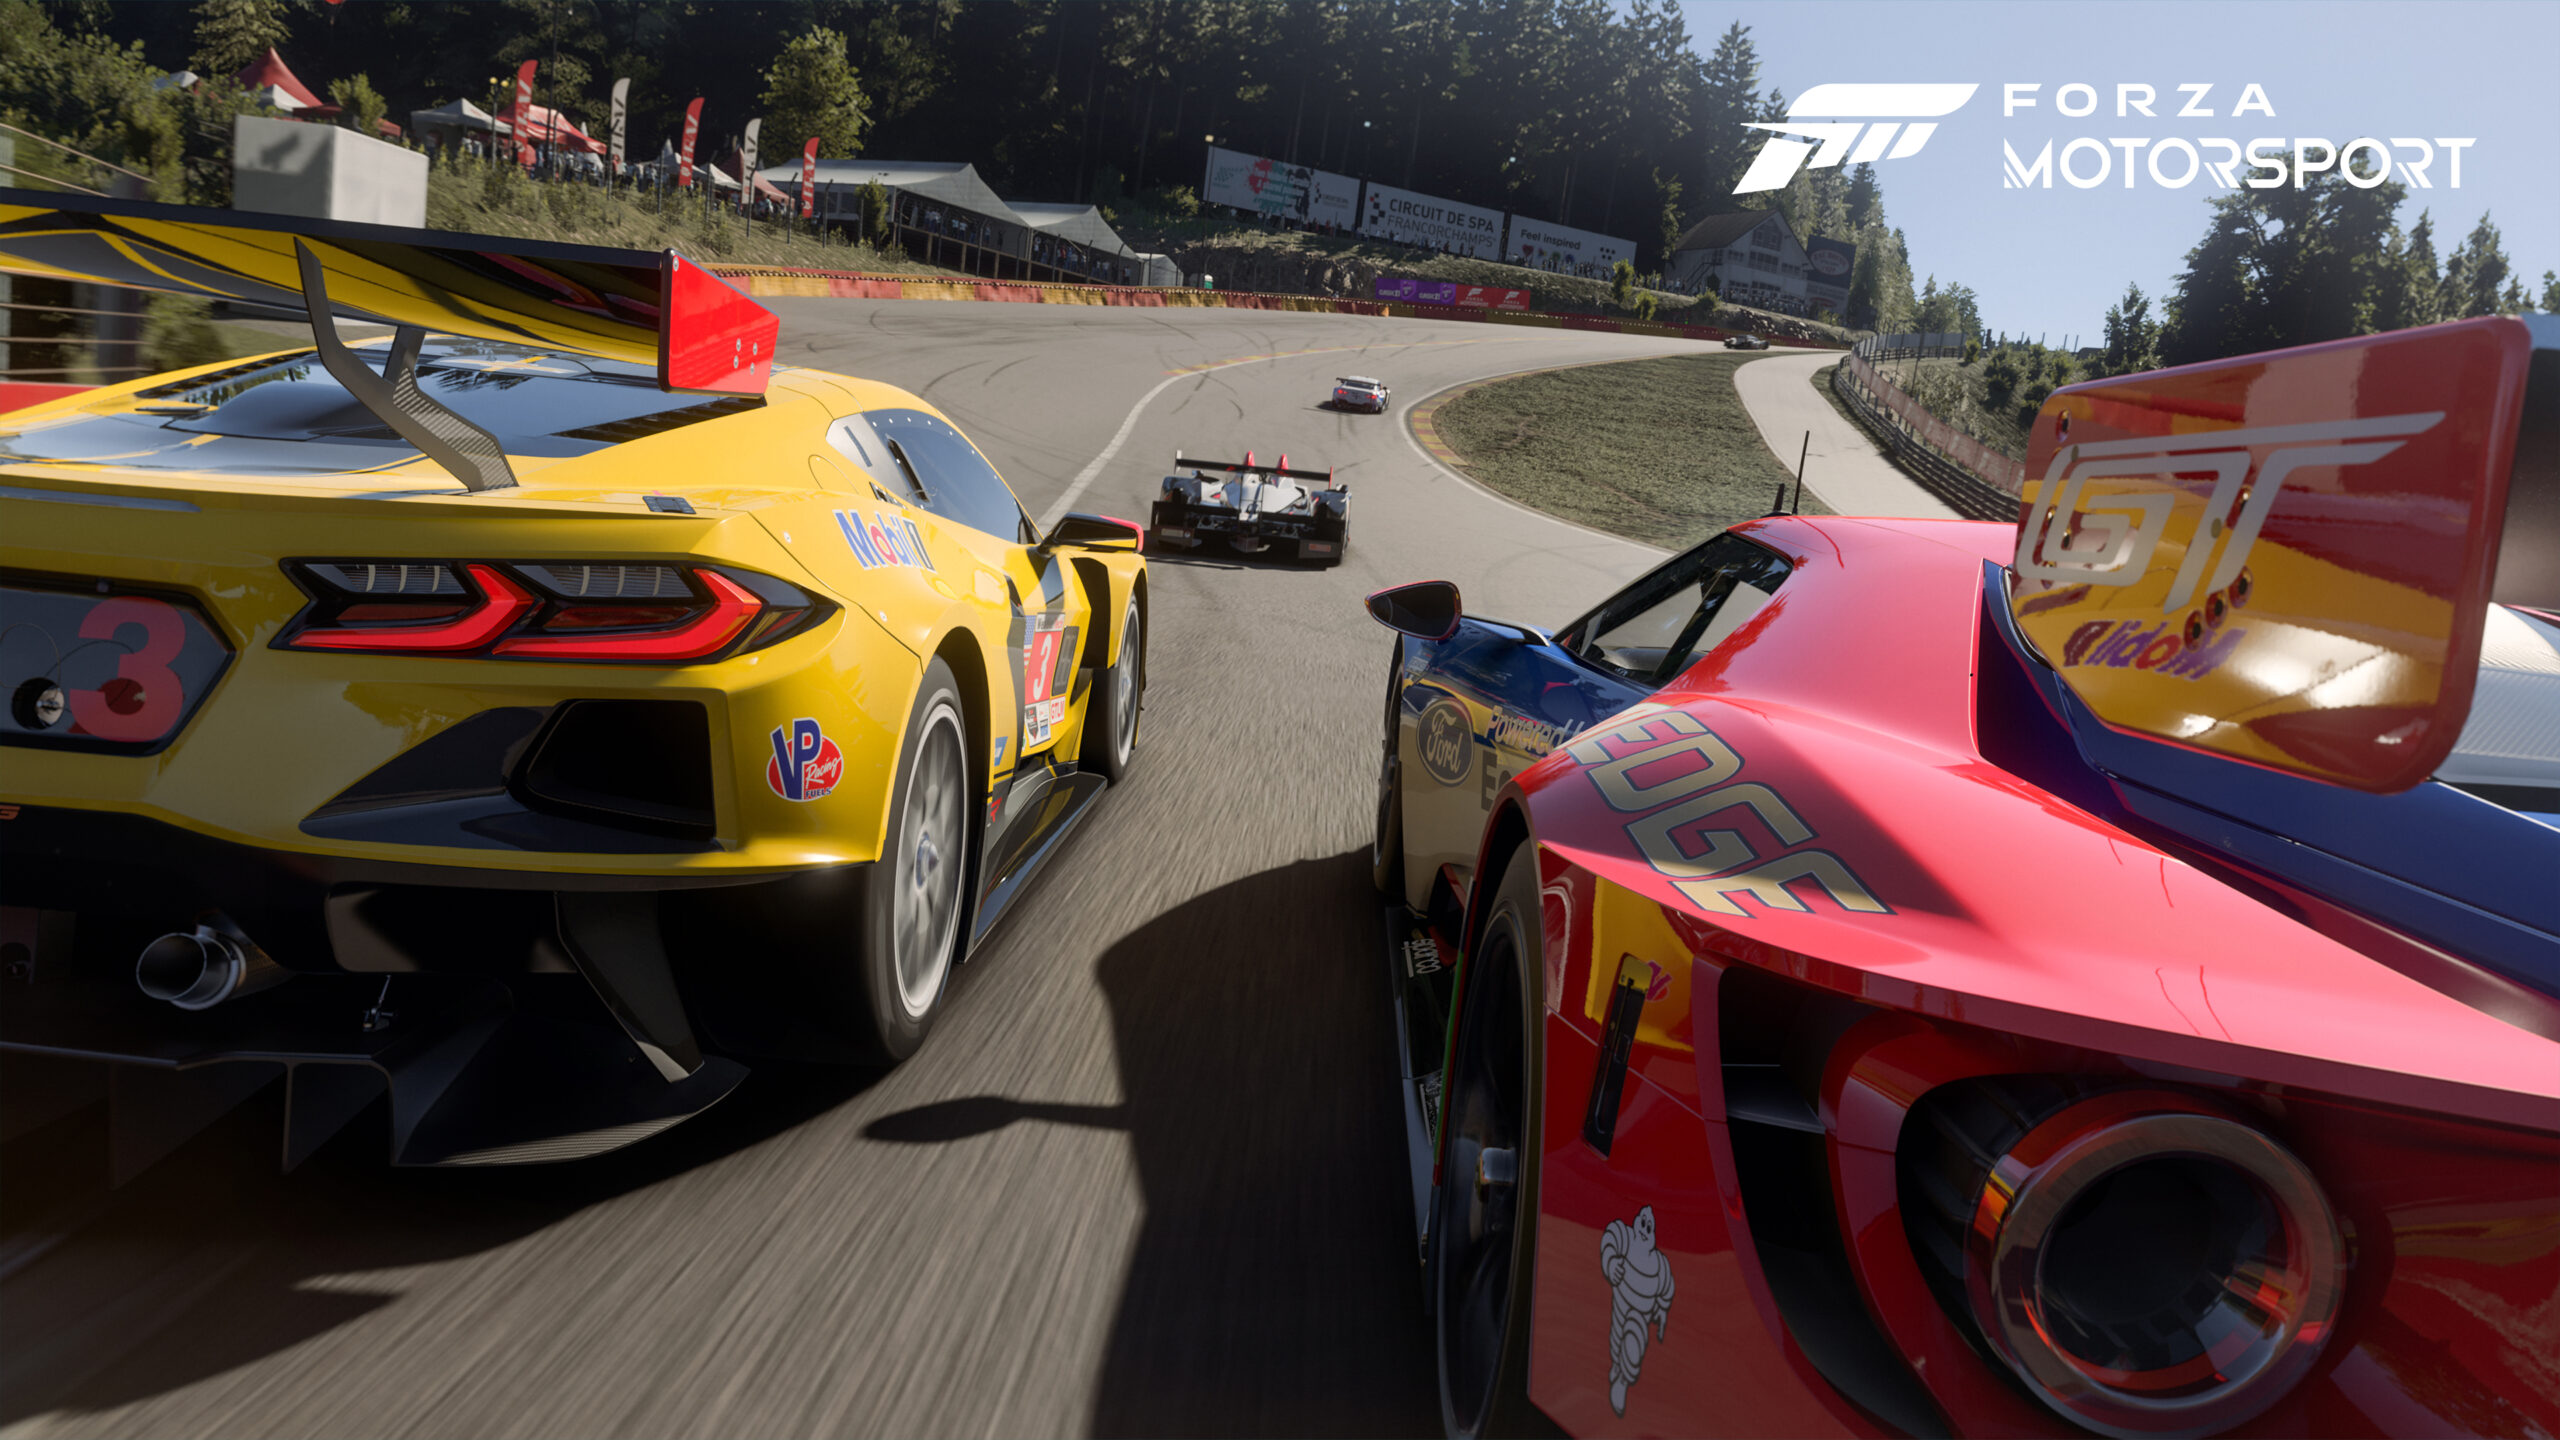 Forza Motorsport review: Reboot racing fun that can't keep up with